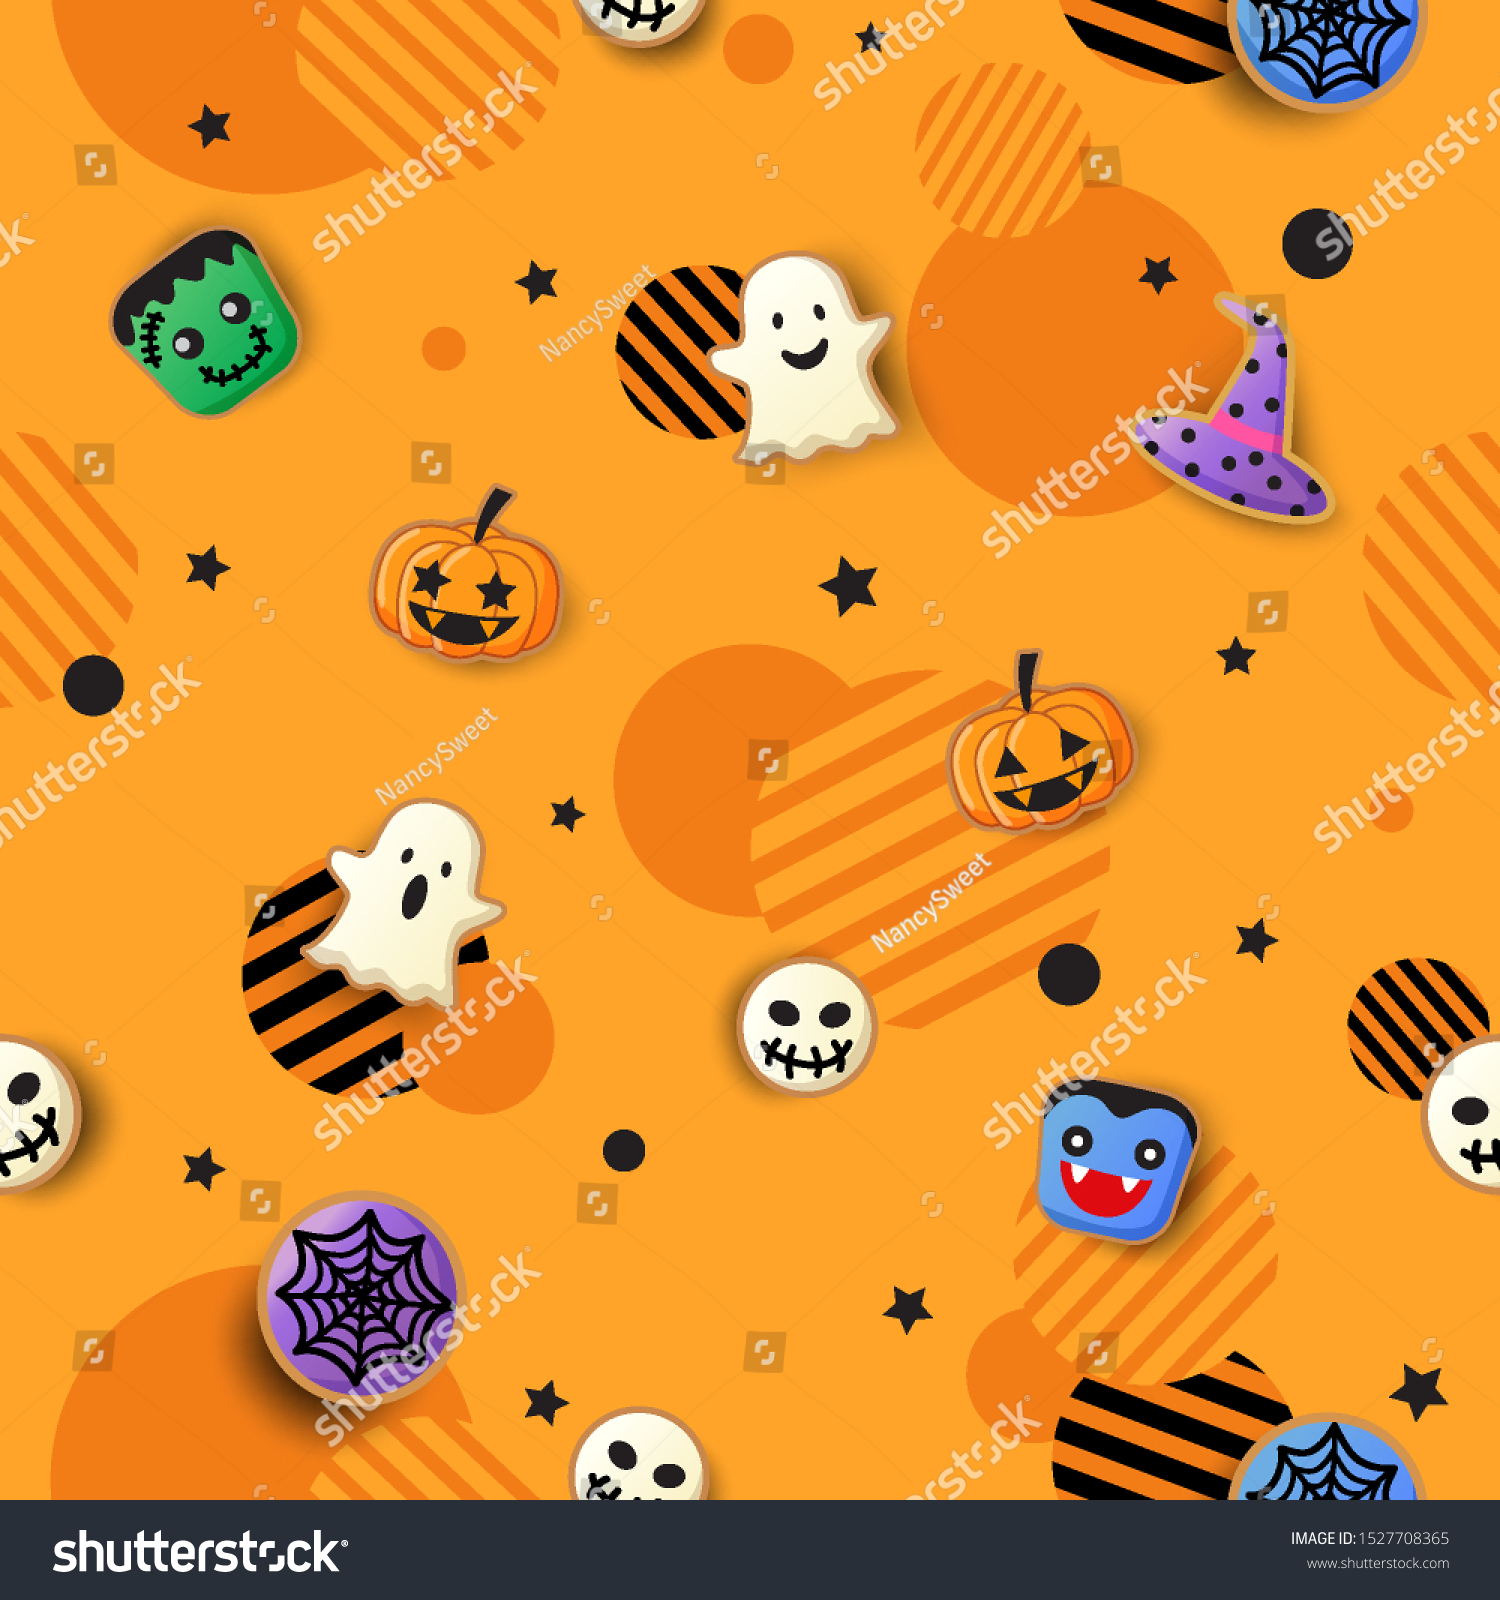 SVG of Illustration vector of Halloween party with cookies monster design to seamless pattern svg